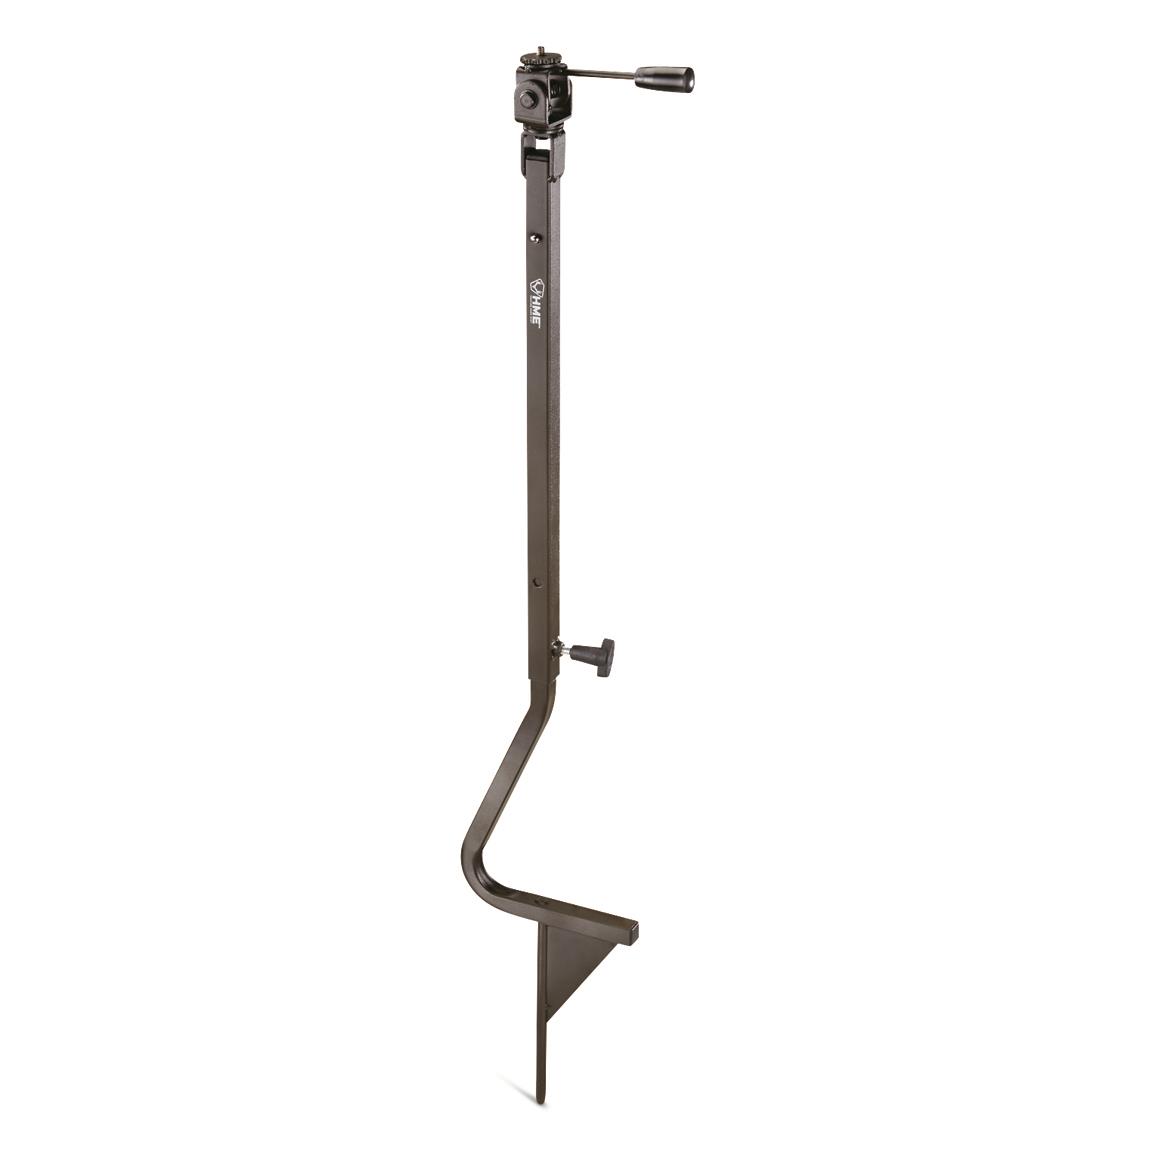 Ground spade for easy mounting